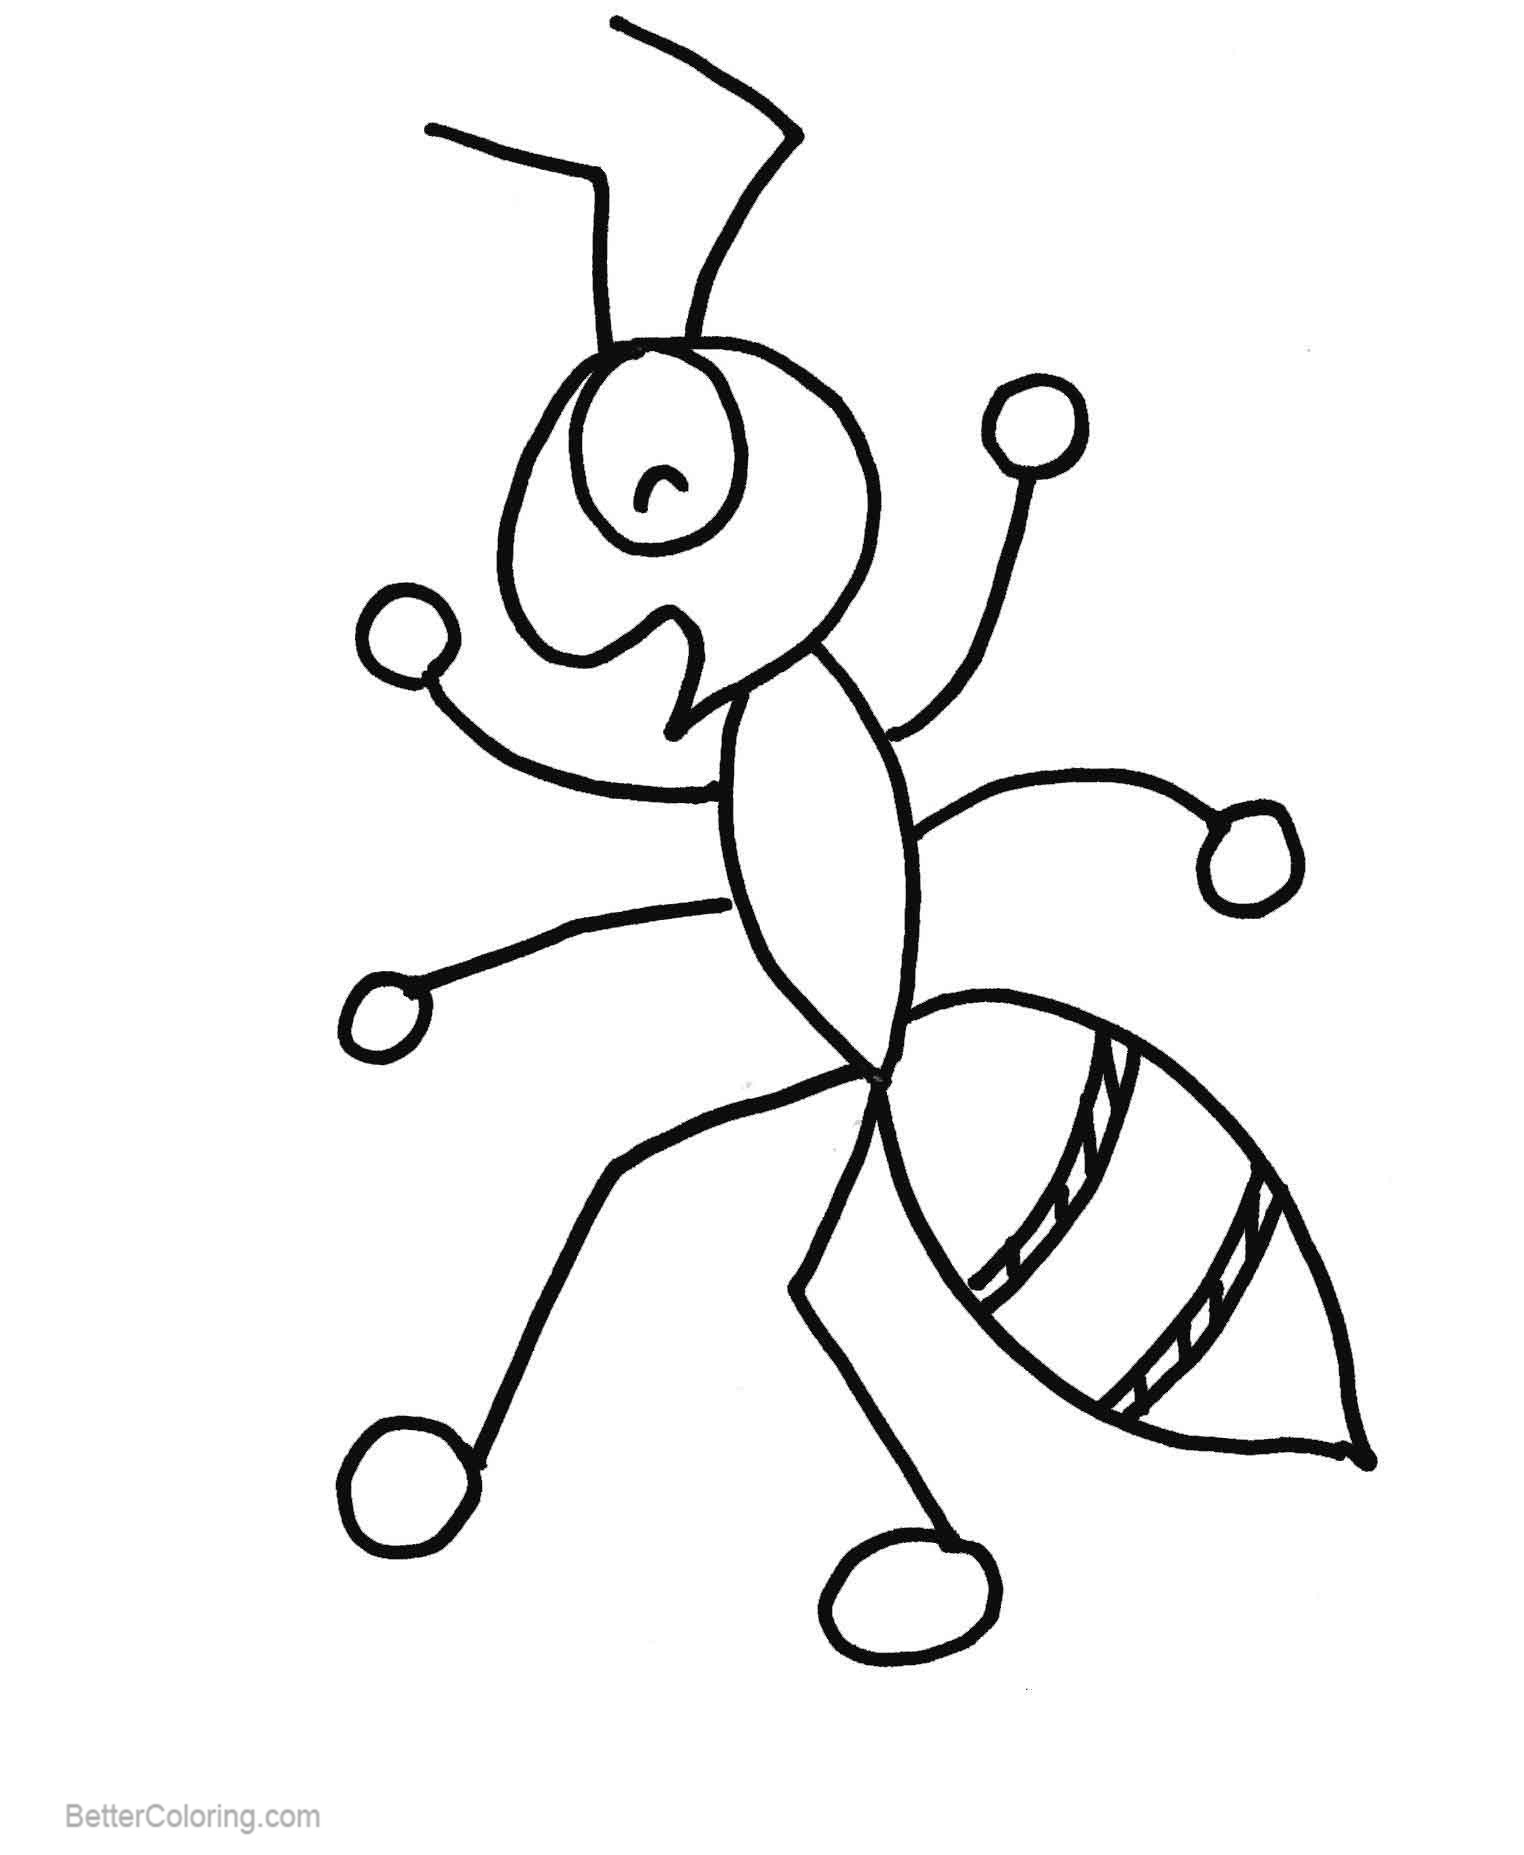 Free Cartoon Ants Coloring Pages printable